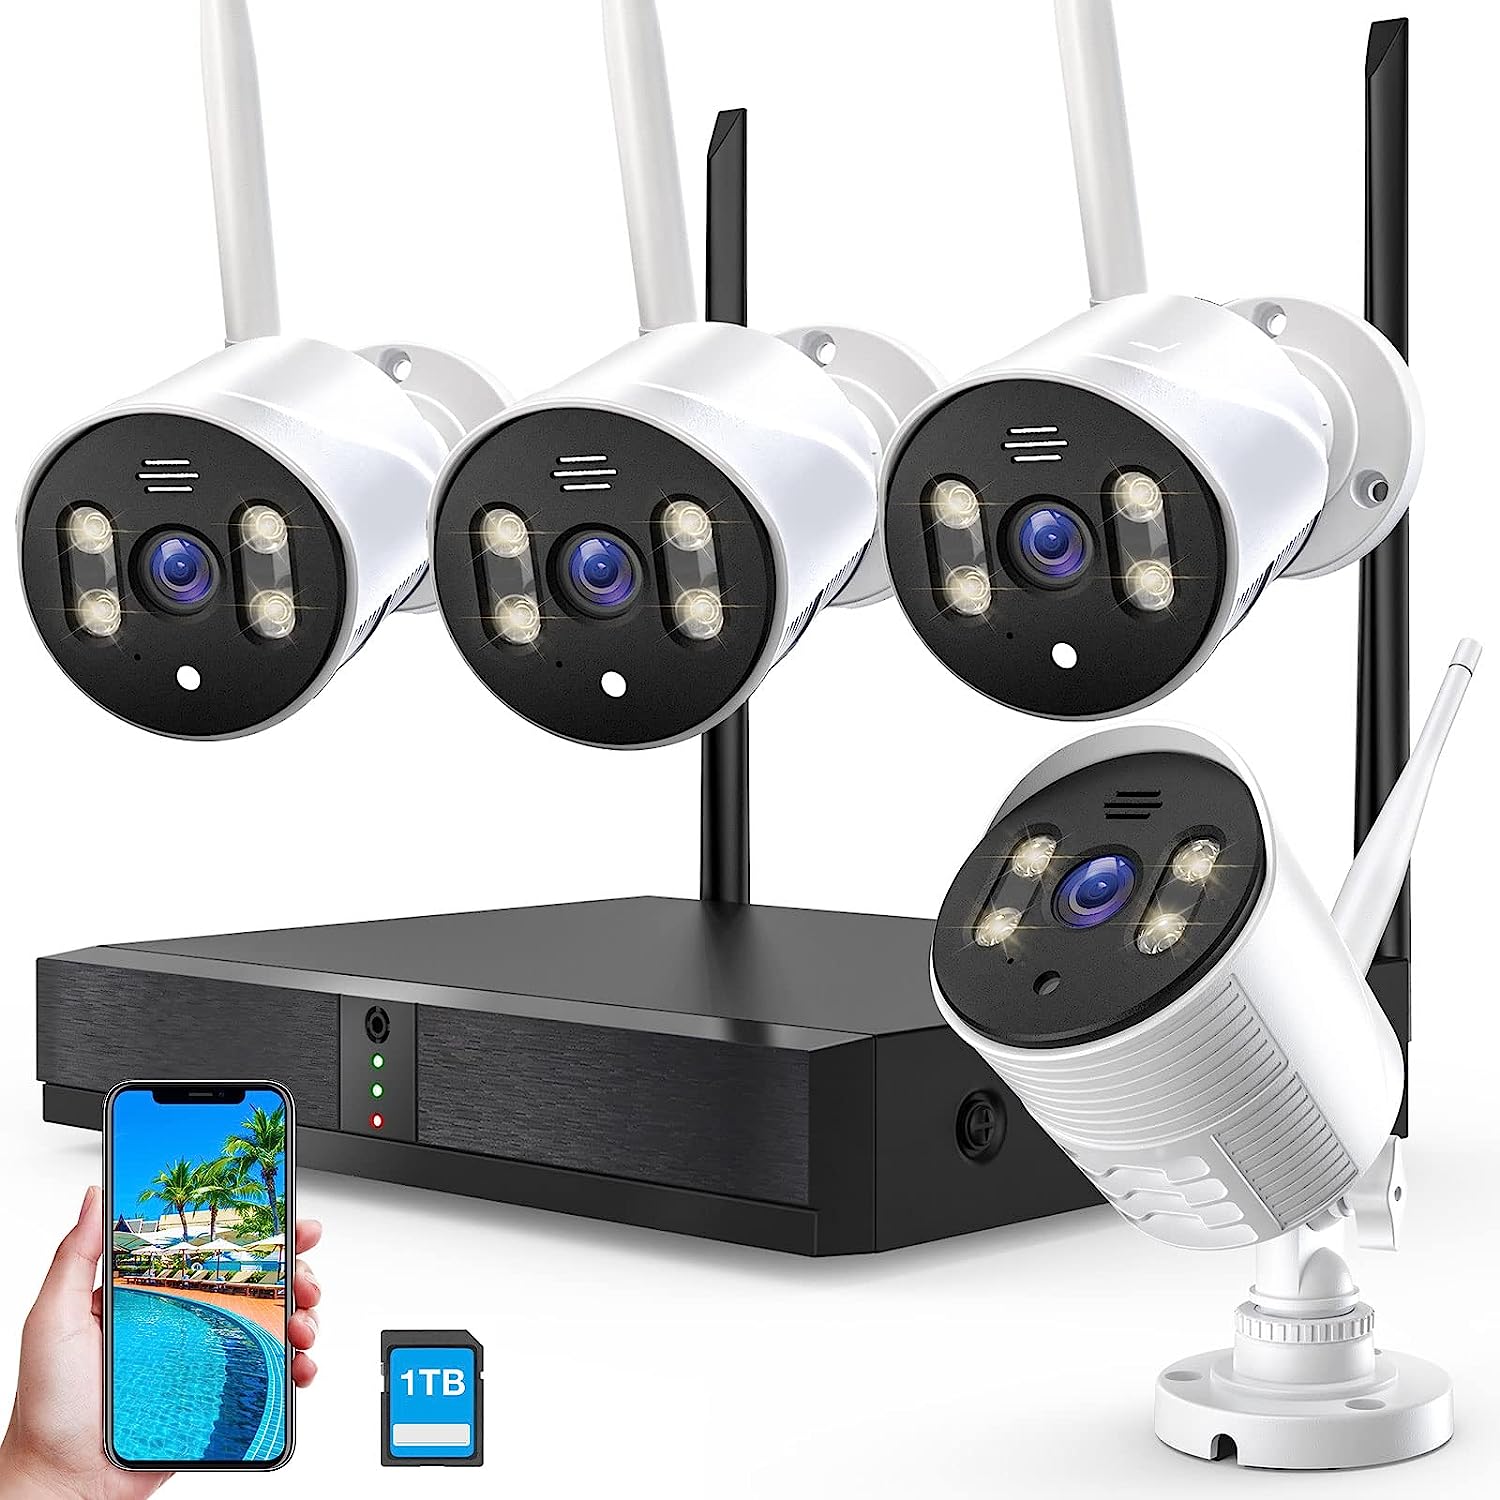 night vision security camera systems detailed review